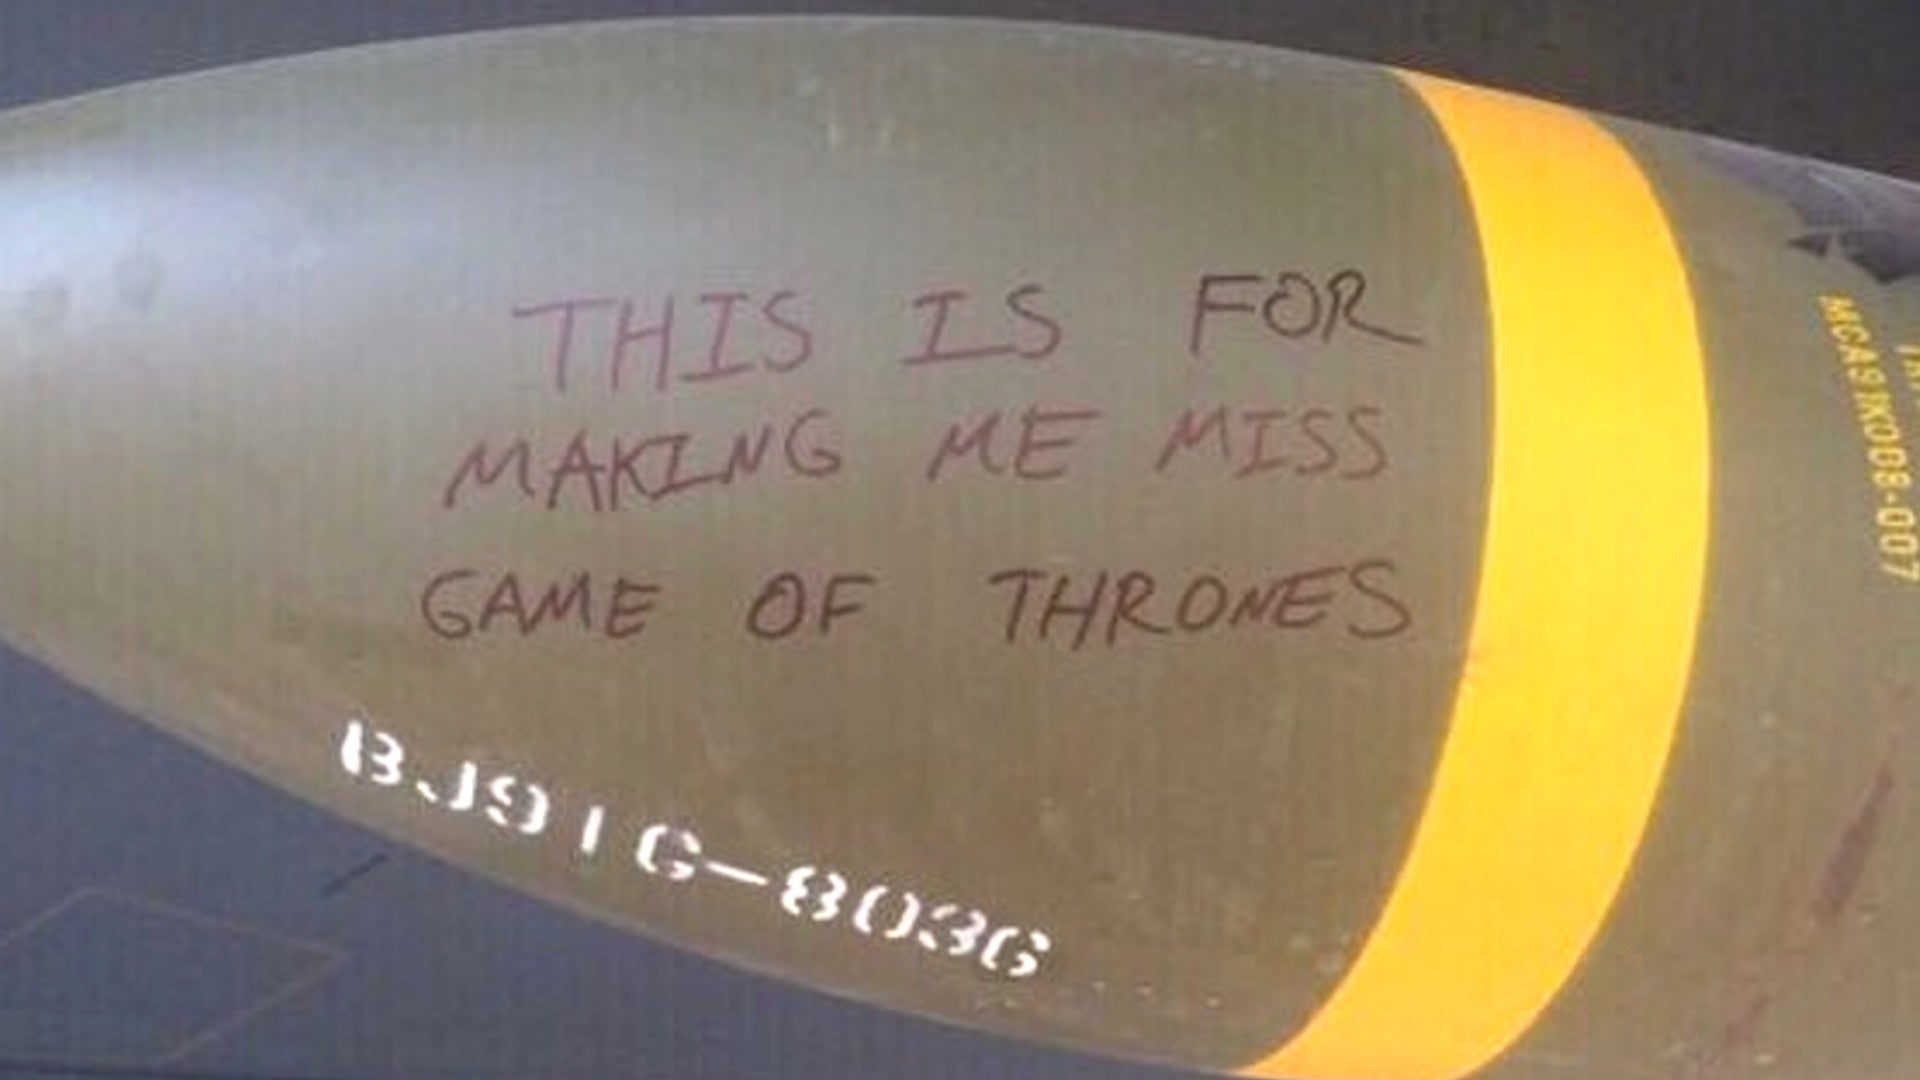 Message On Bunker Buster Bomb Tells ISIS “This Is For Making Me Miss Game of Thrones”